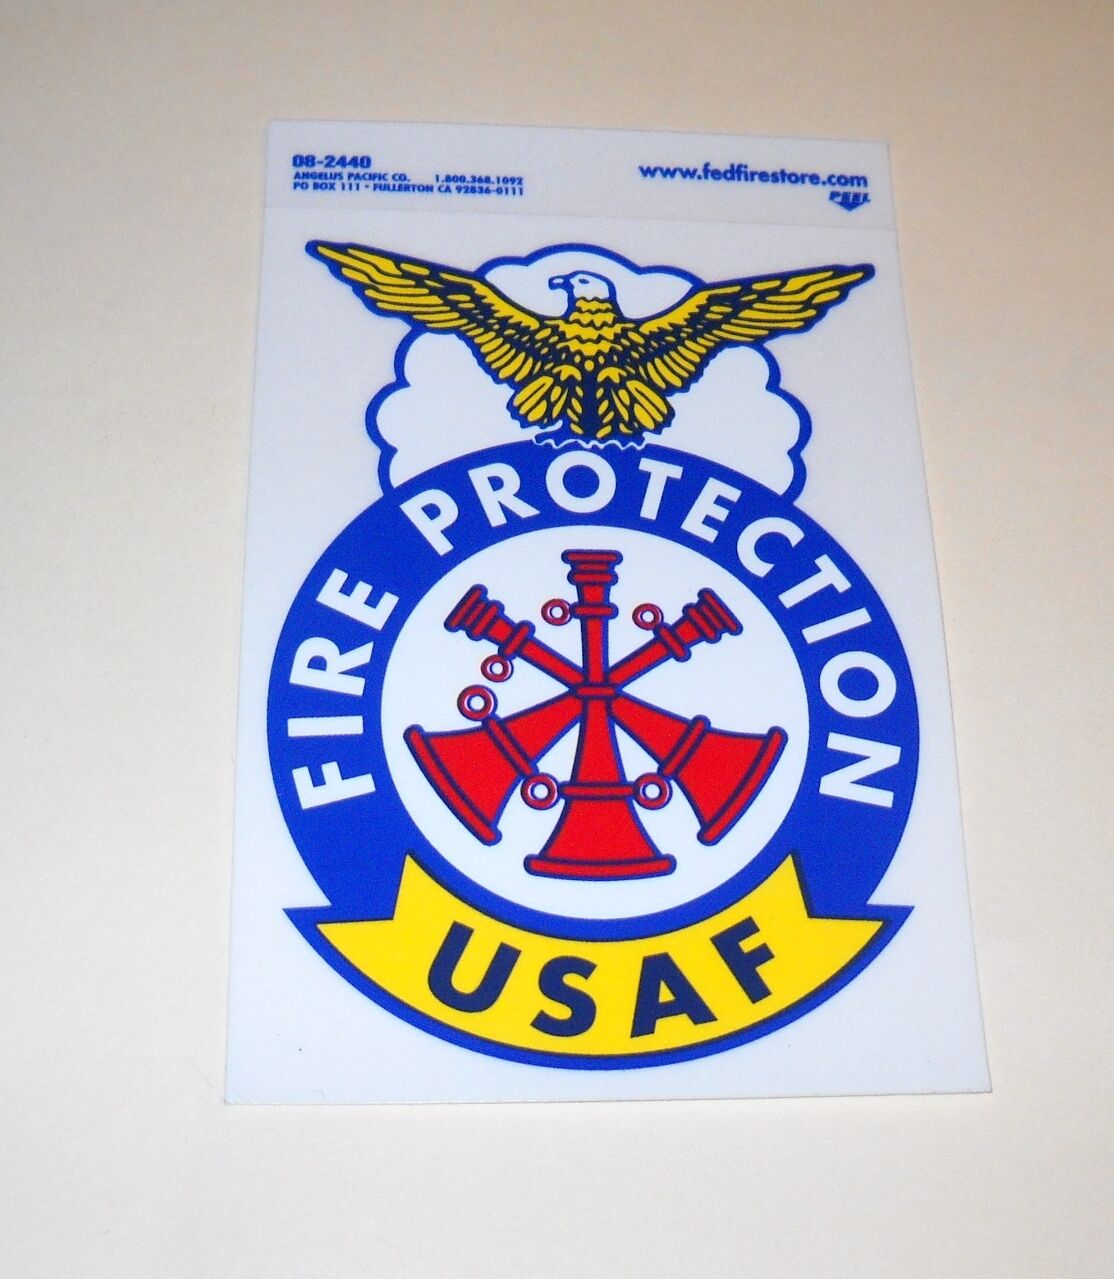 USAF Fire Protection Assistant Chief Badge Decal